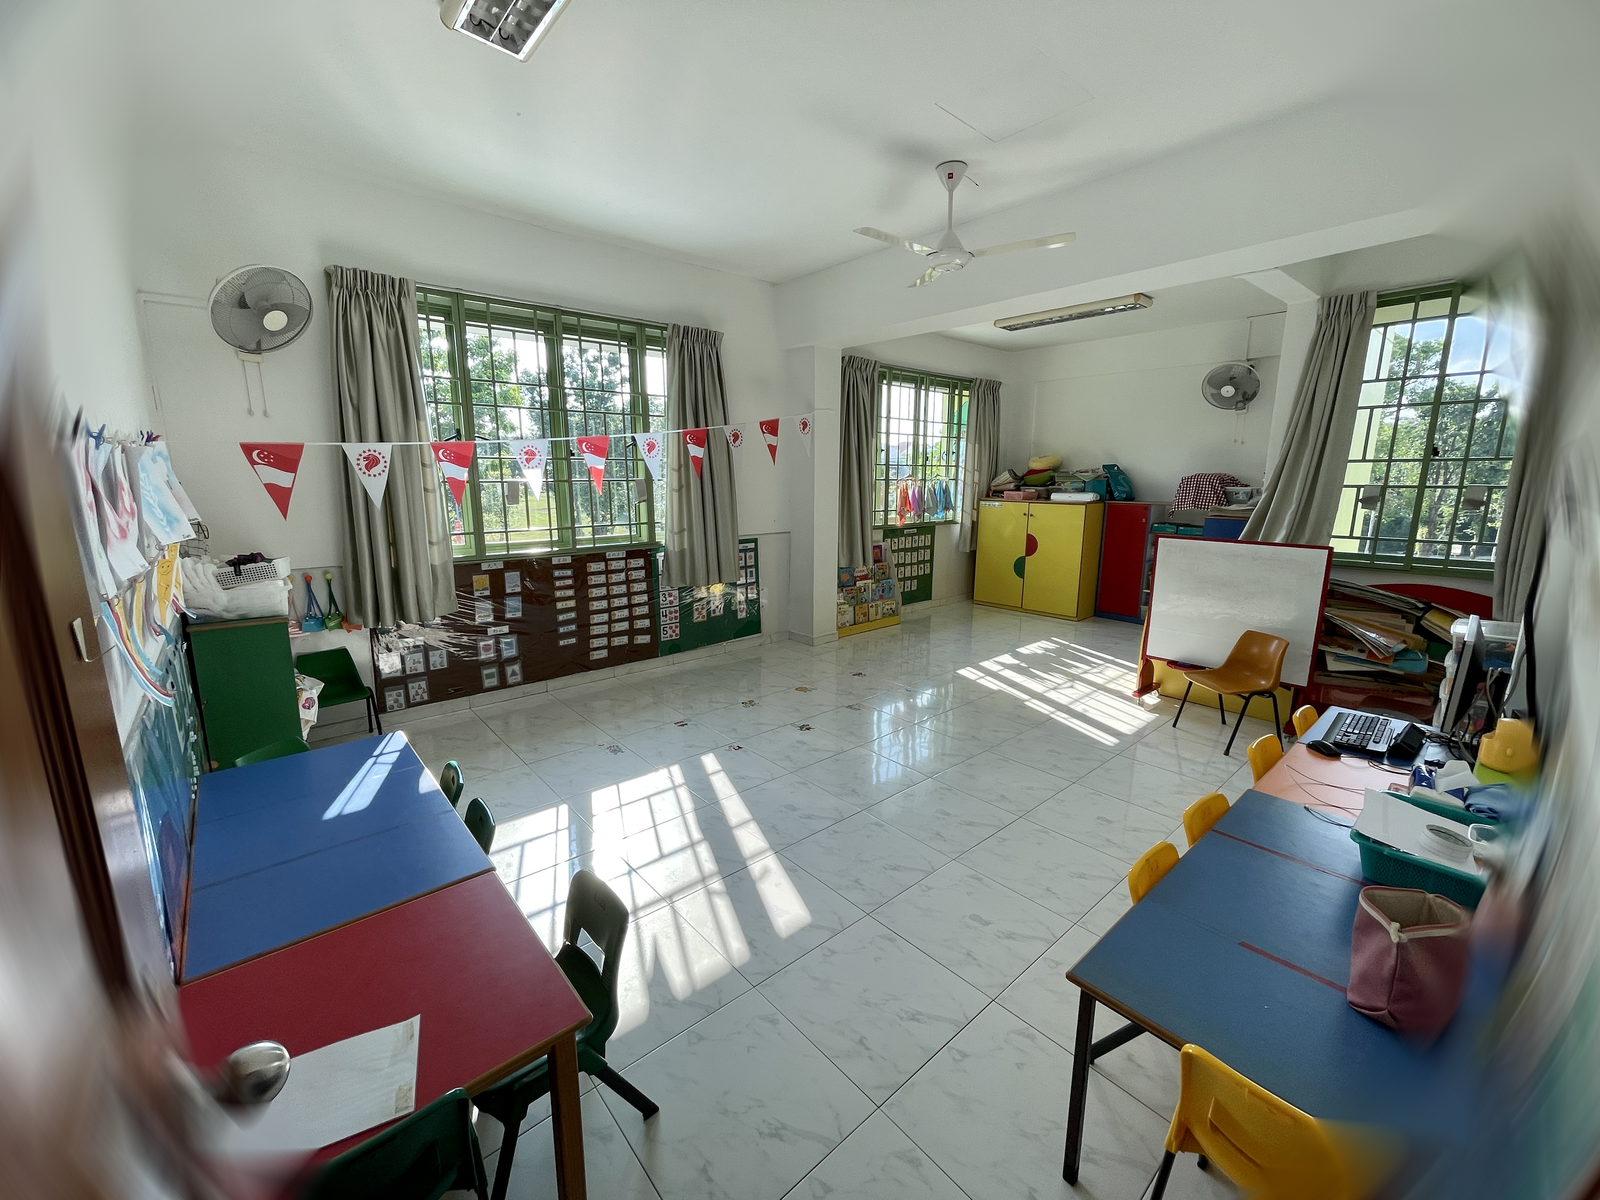 Kids and Kins Childcare Centre classroom image